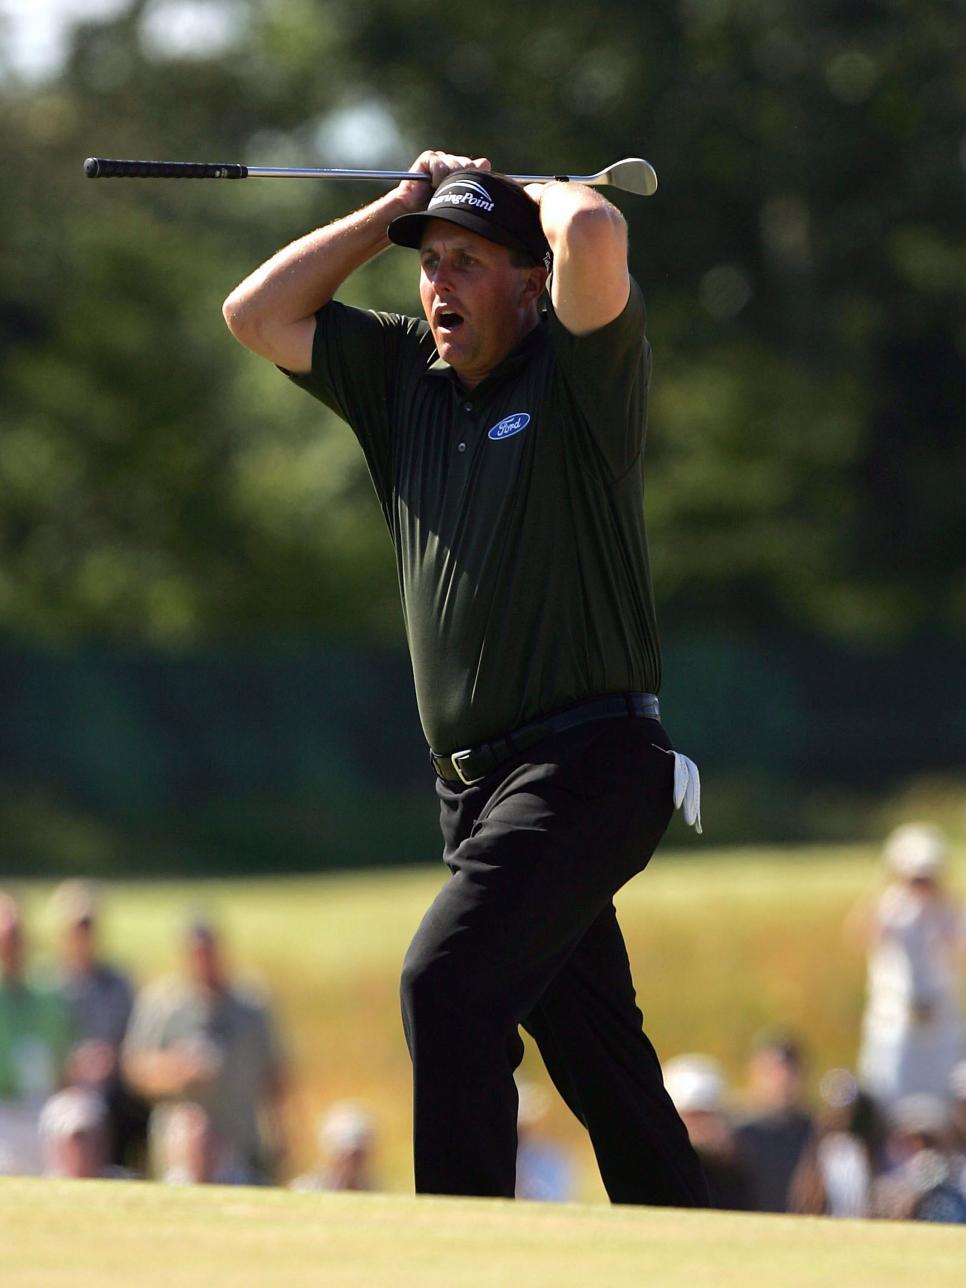 phil-mickelson-2004-us-open-sunday-7th-hole.jpg